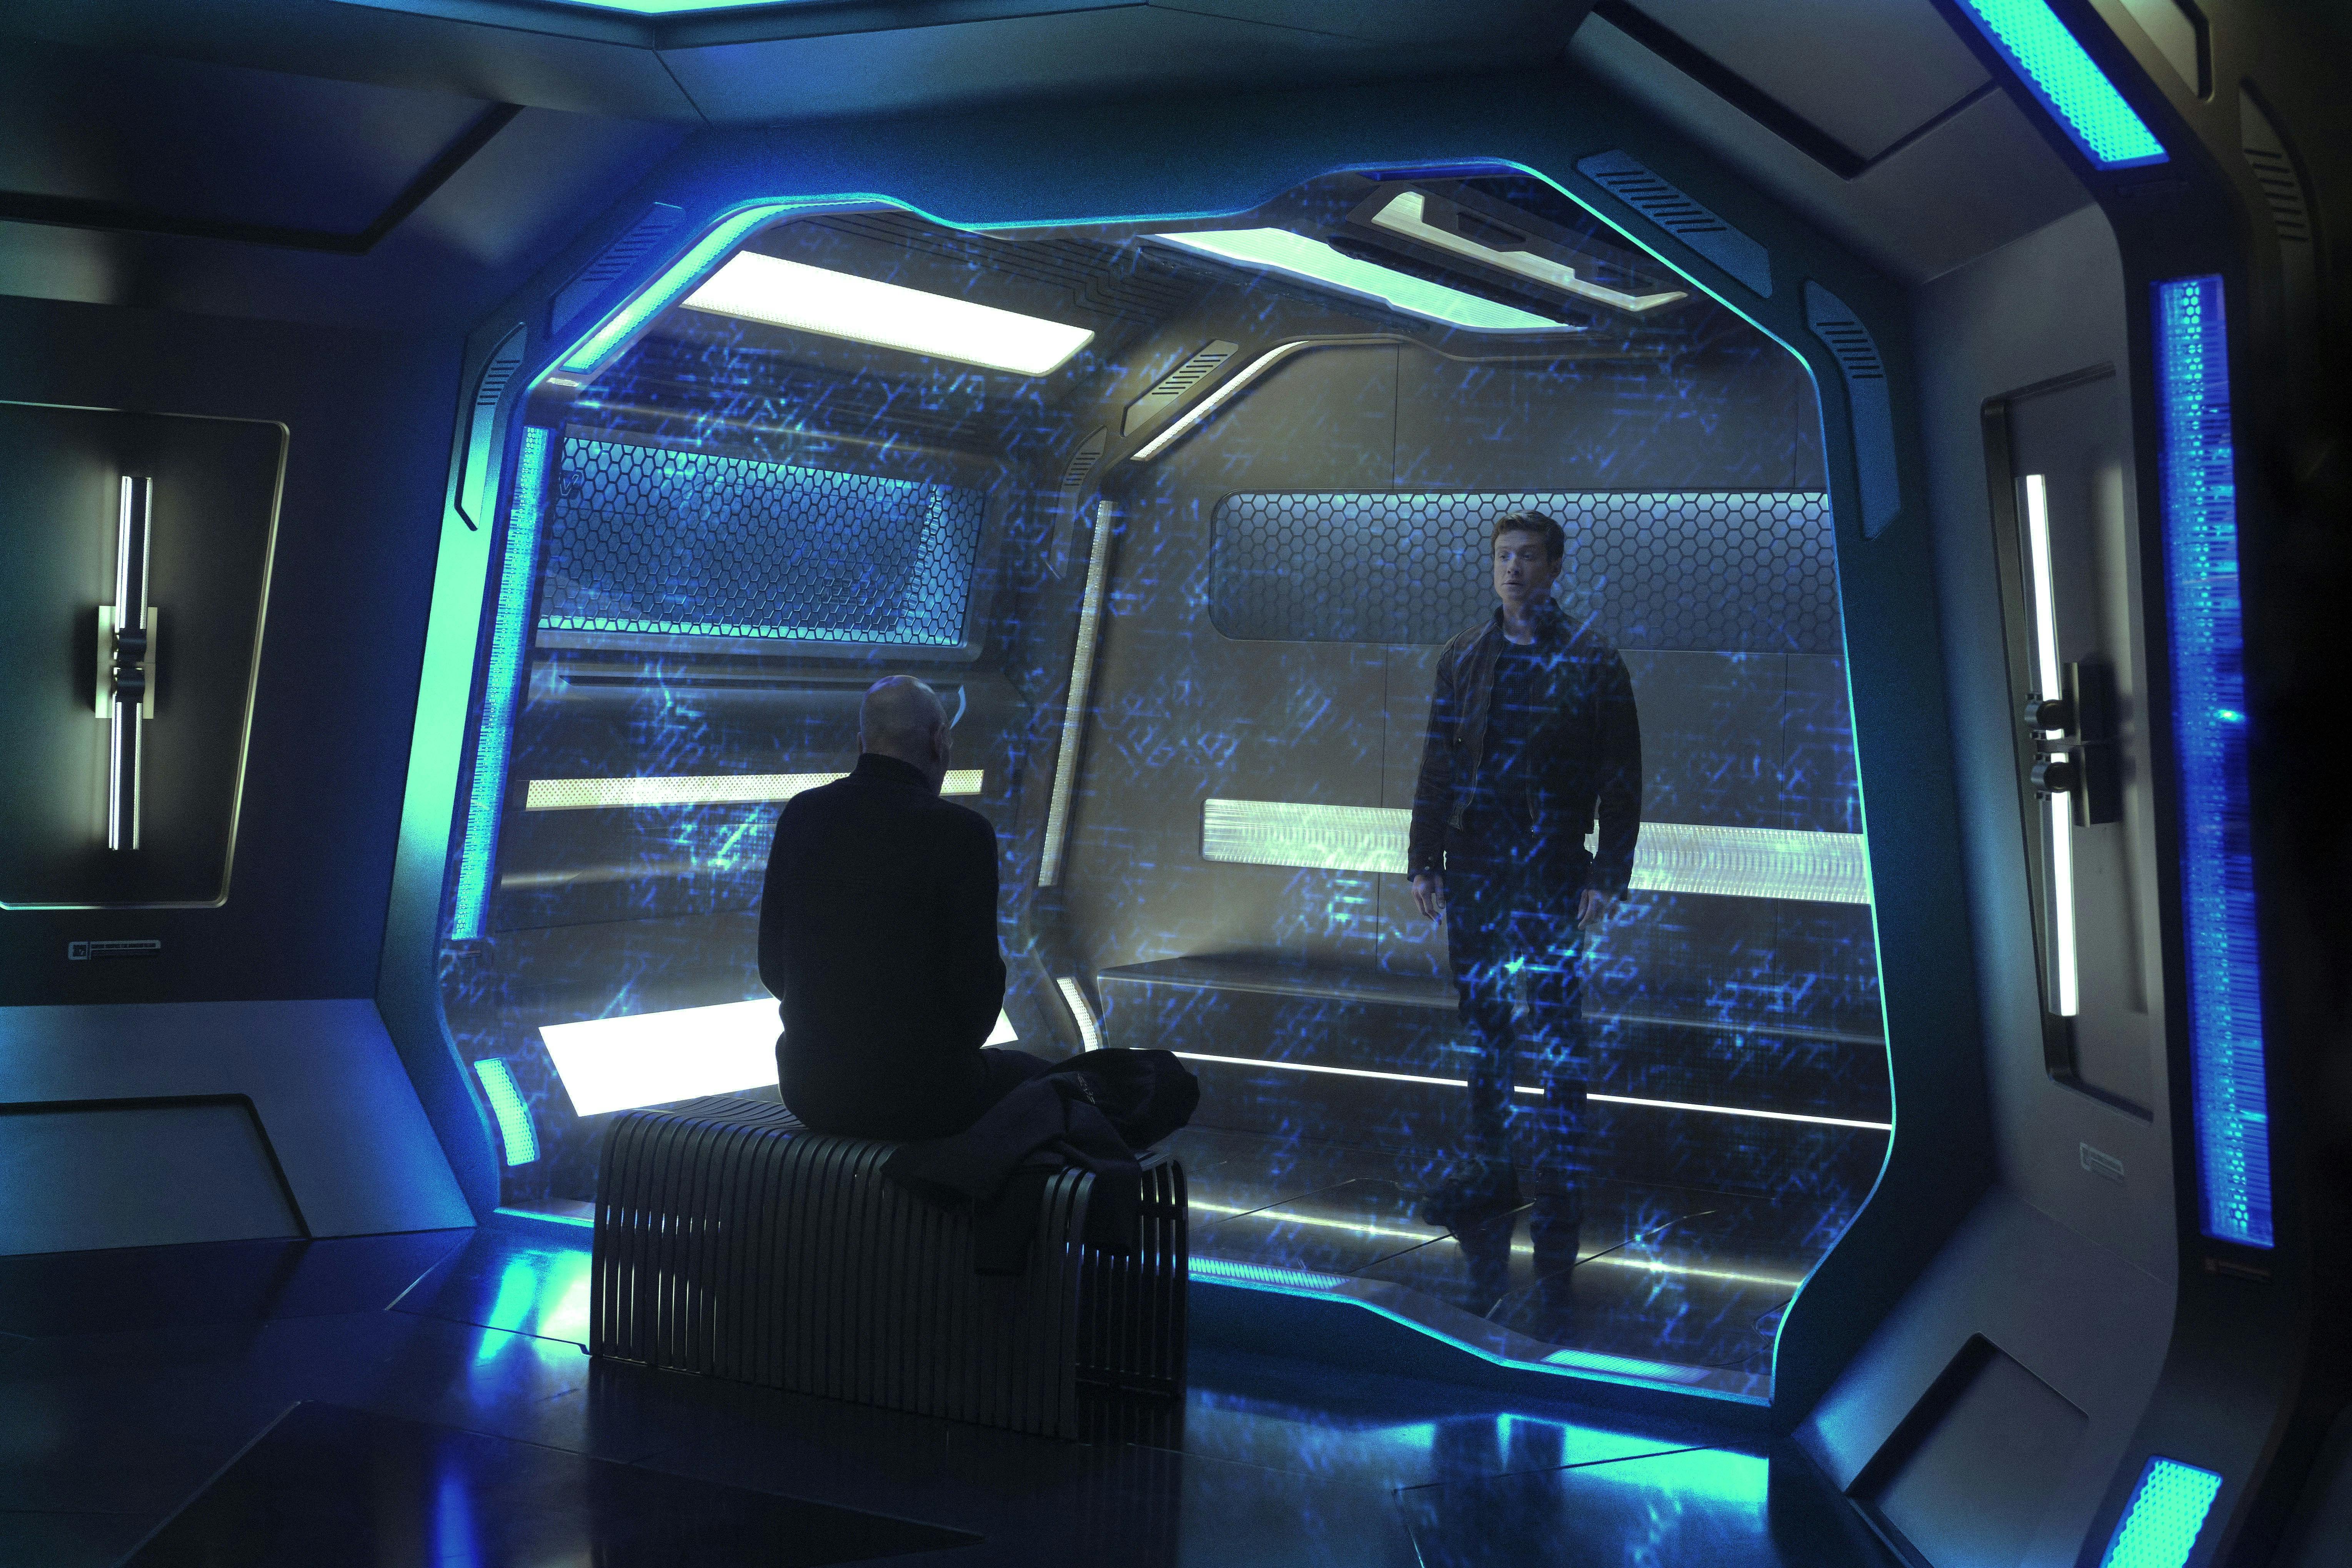 Picard sits across Jack Crusher who stands in the brig of the Titan